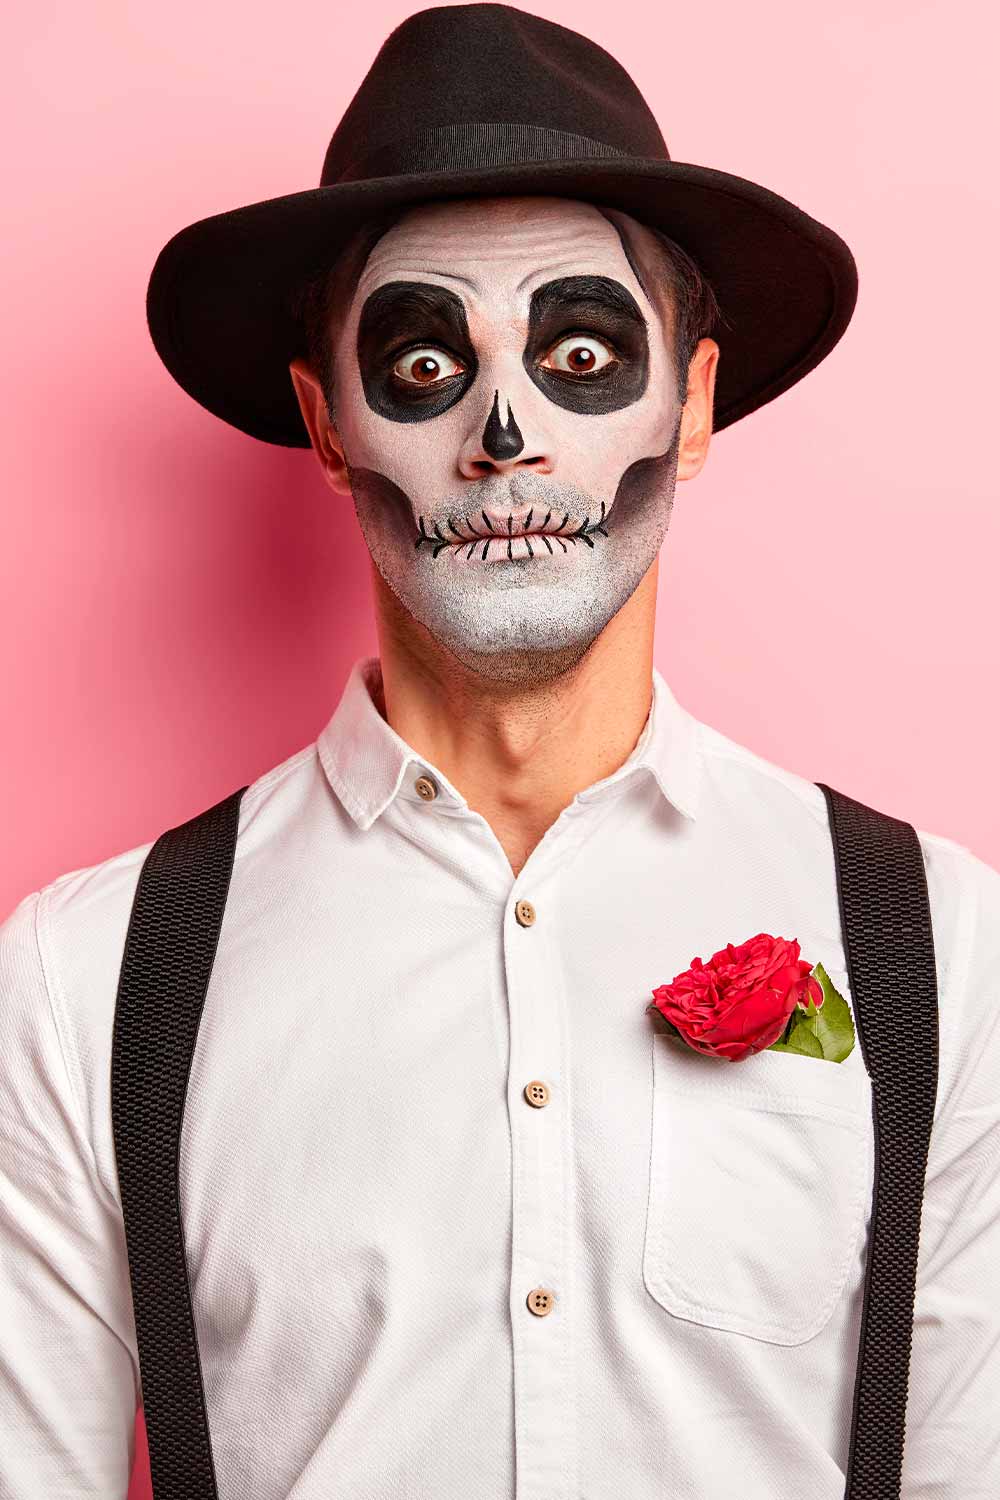 Day Of The Dead #halloweencostumes #halloweencostumeideas #menshalloweencostumes #halloweencostumesformen